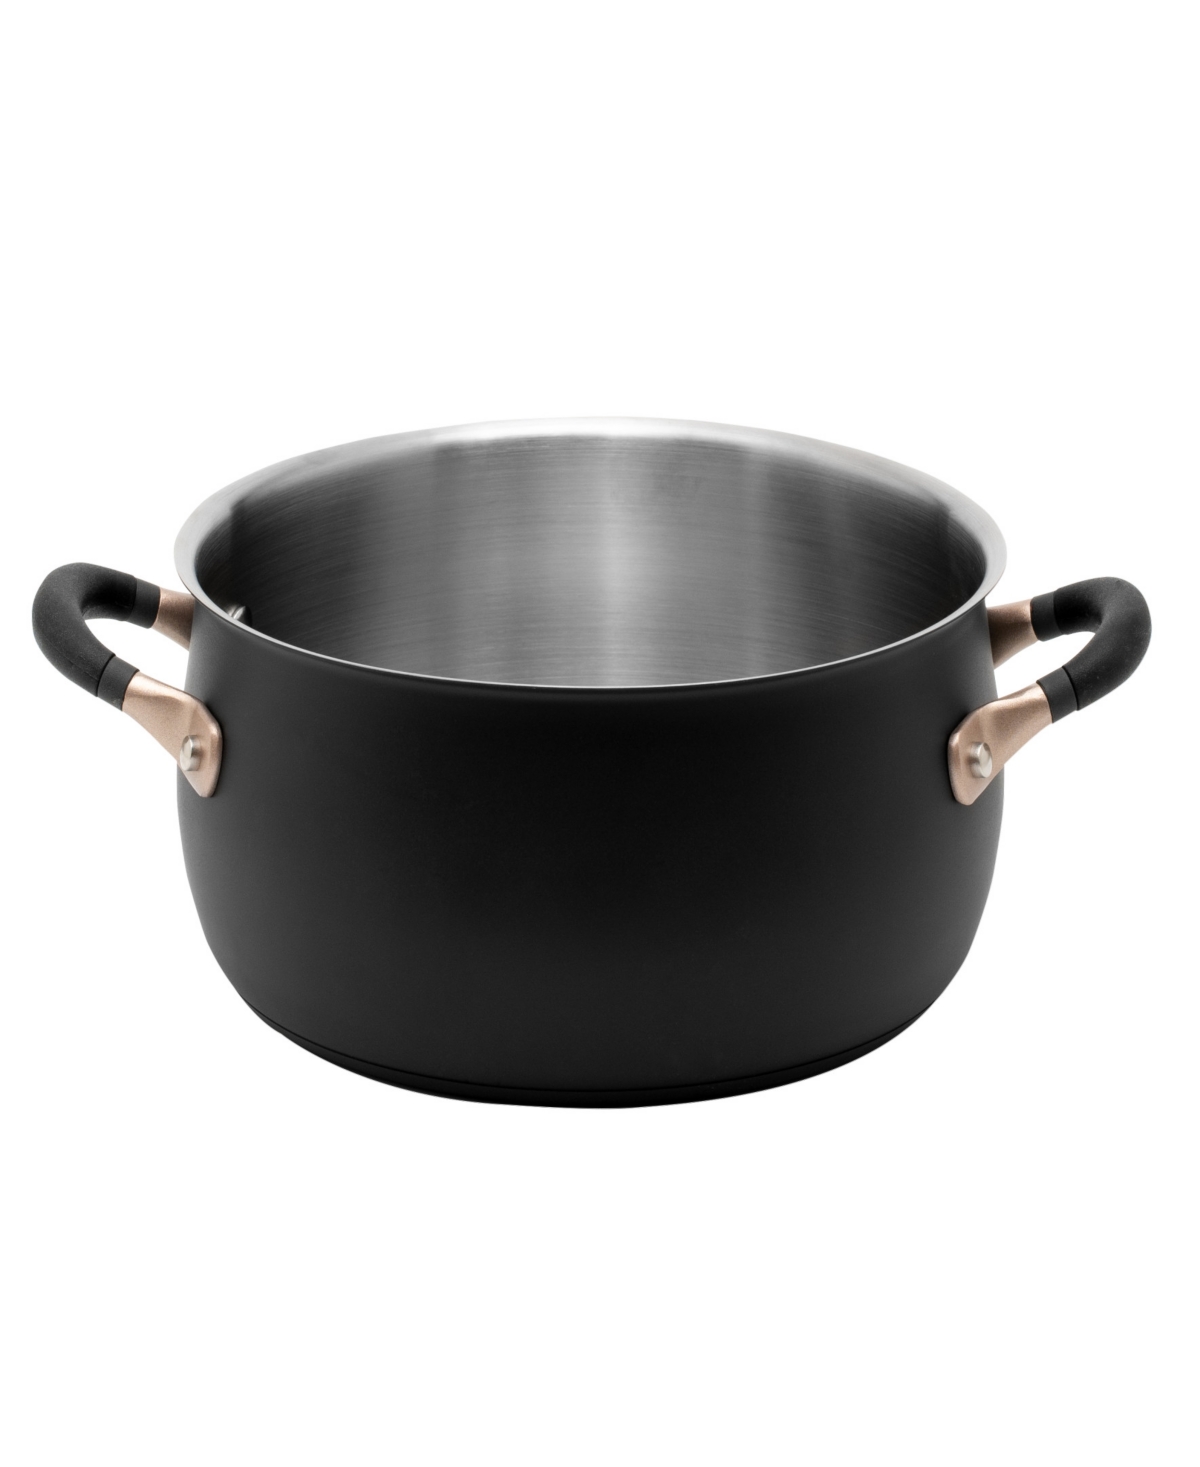 Meyer Accent Series Stainless Steel 5-quart Dutch Oven In Matte Black With Gold Accent